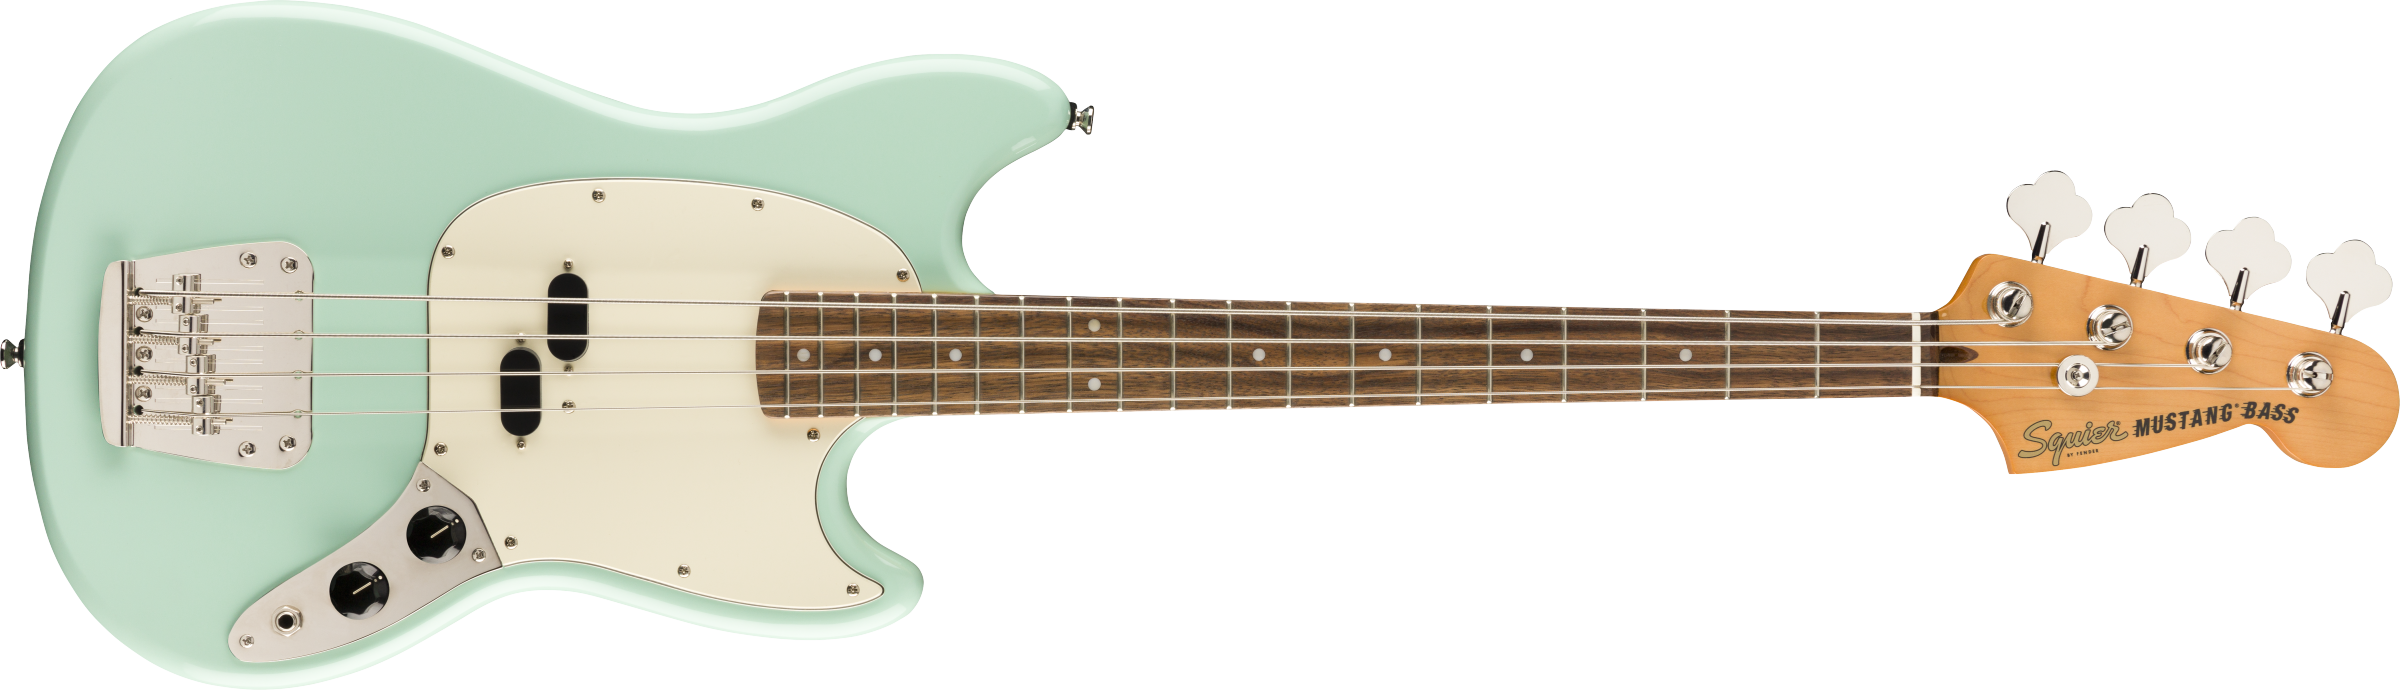 Squier Classic Vibe 60s Mustang Bass, Surf Green 0374570557 — L.A.